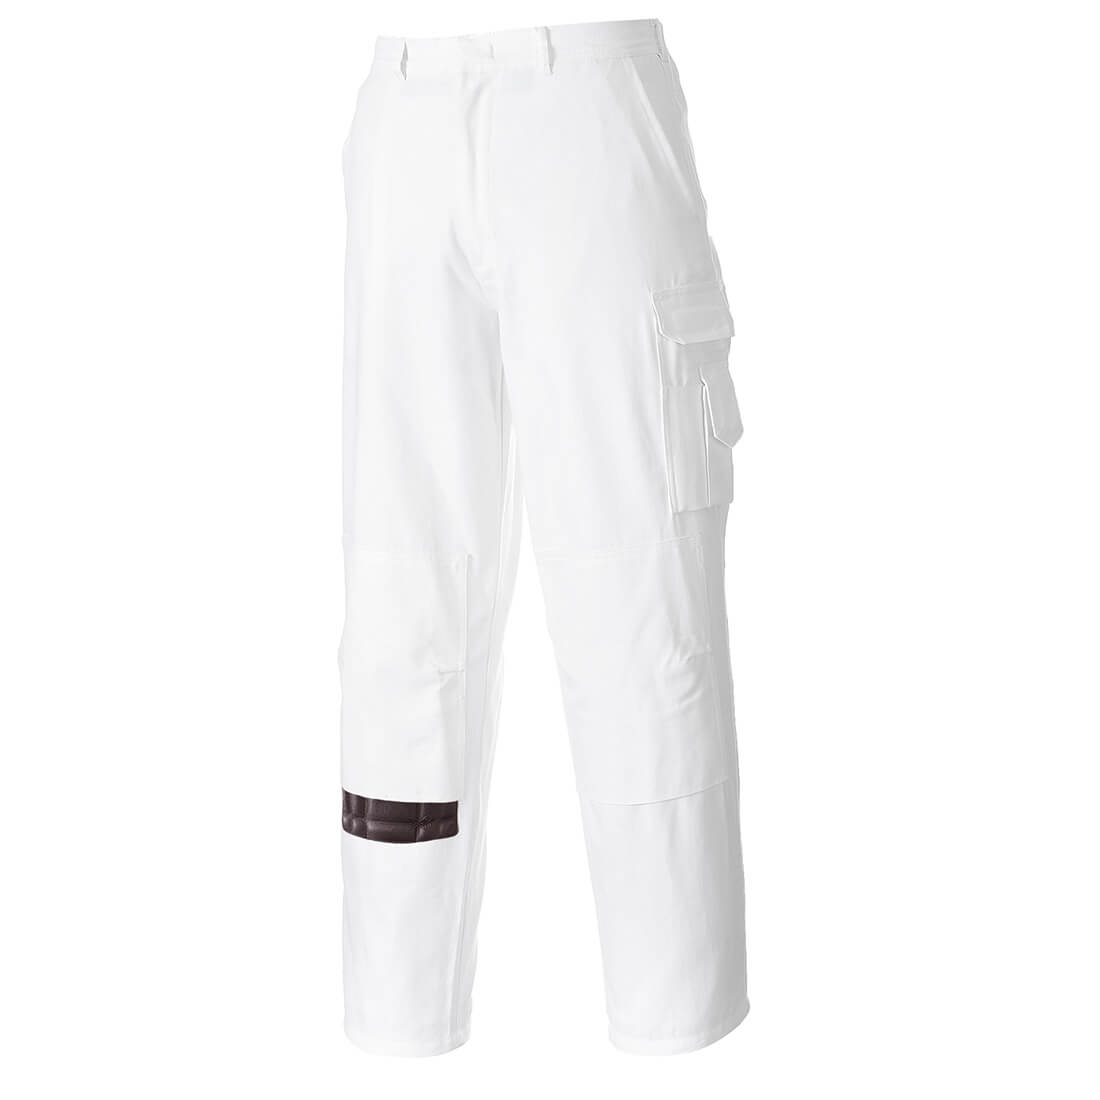 Image of Portwest Painters Trousers White XS 31"